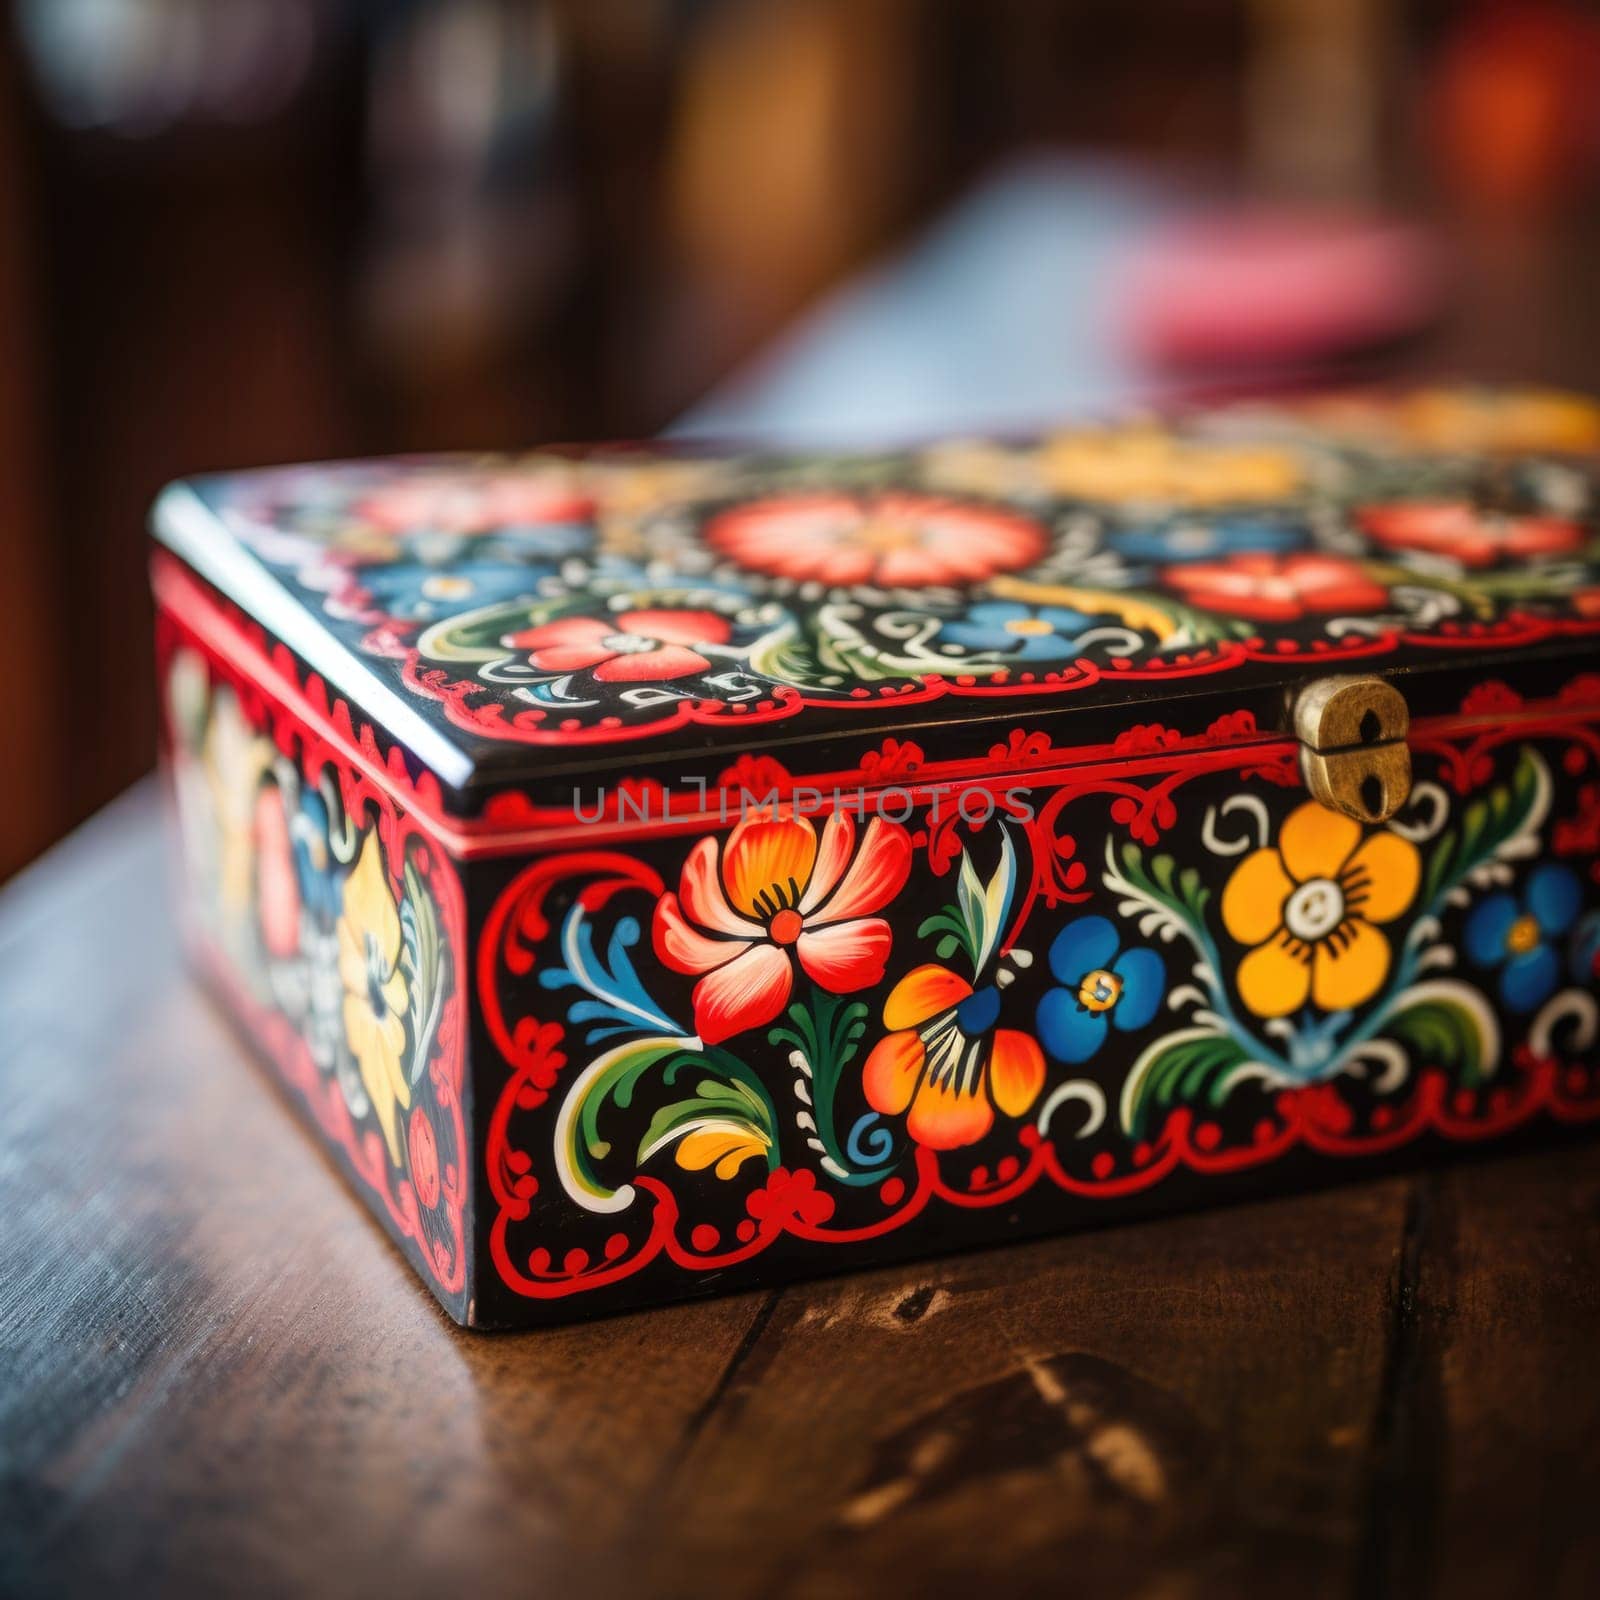 A colorful wooden box with a floral design on it, AI by starush